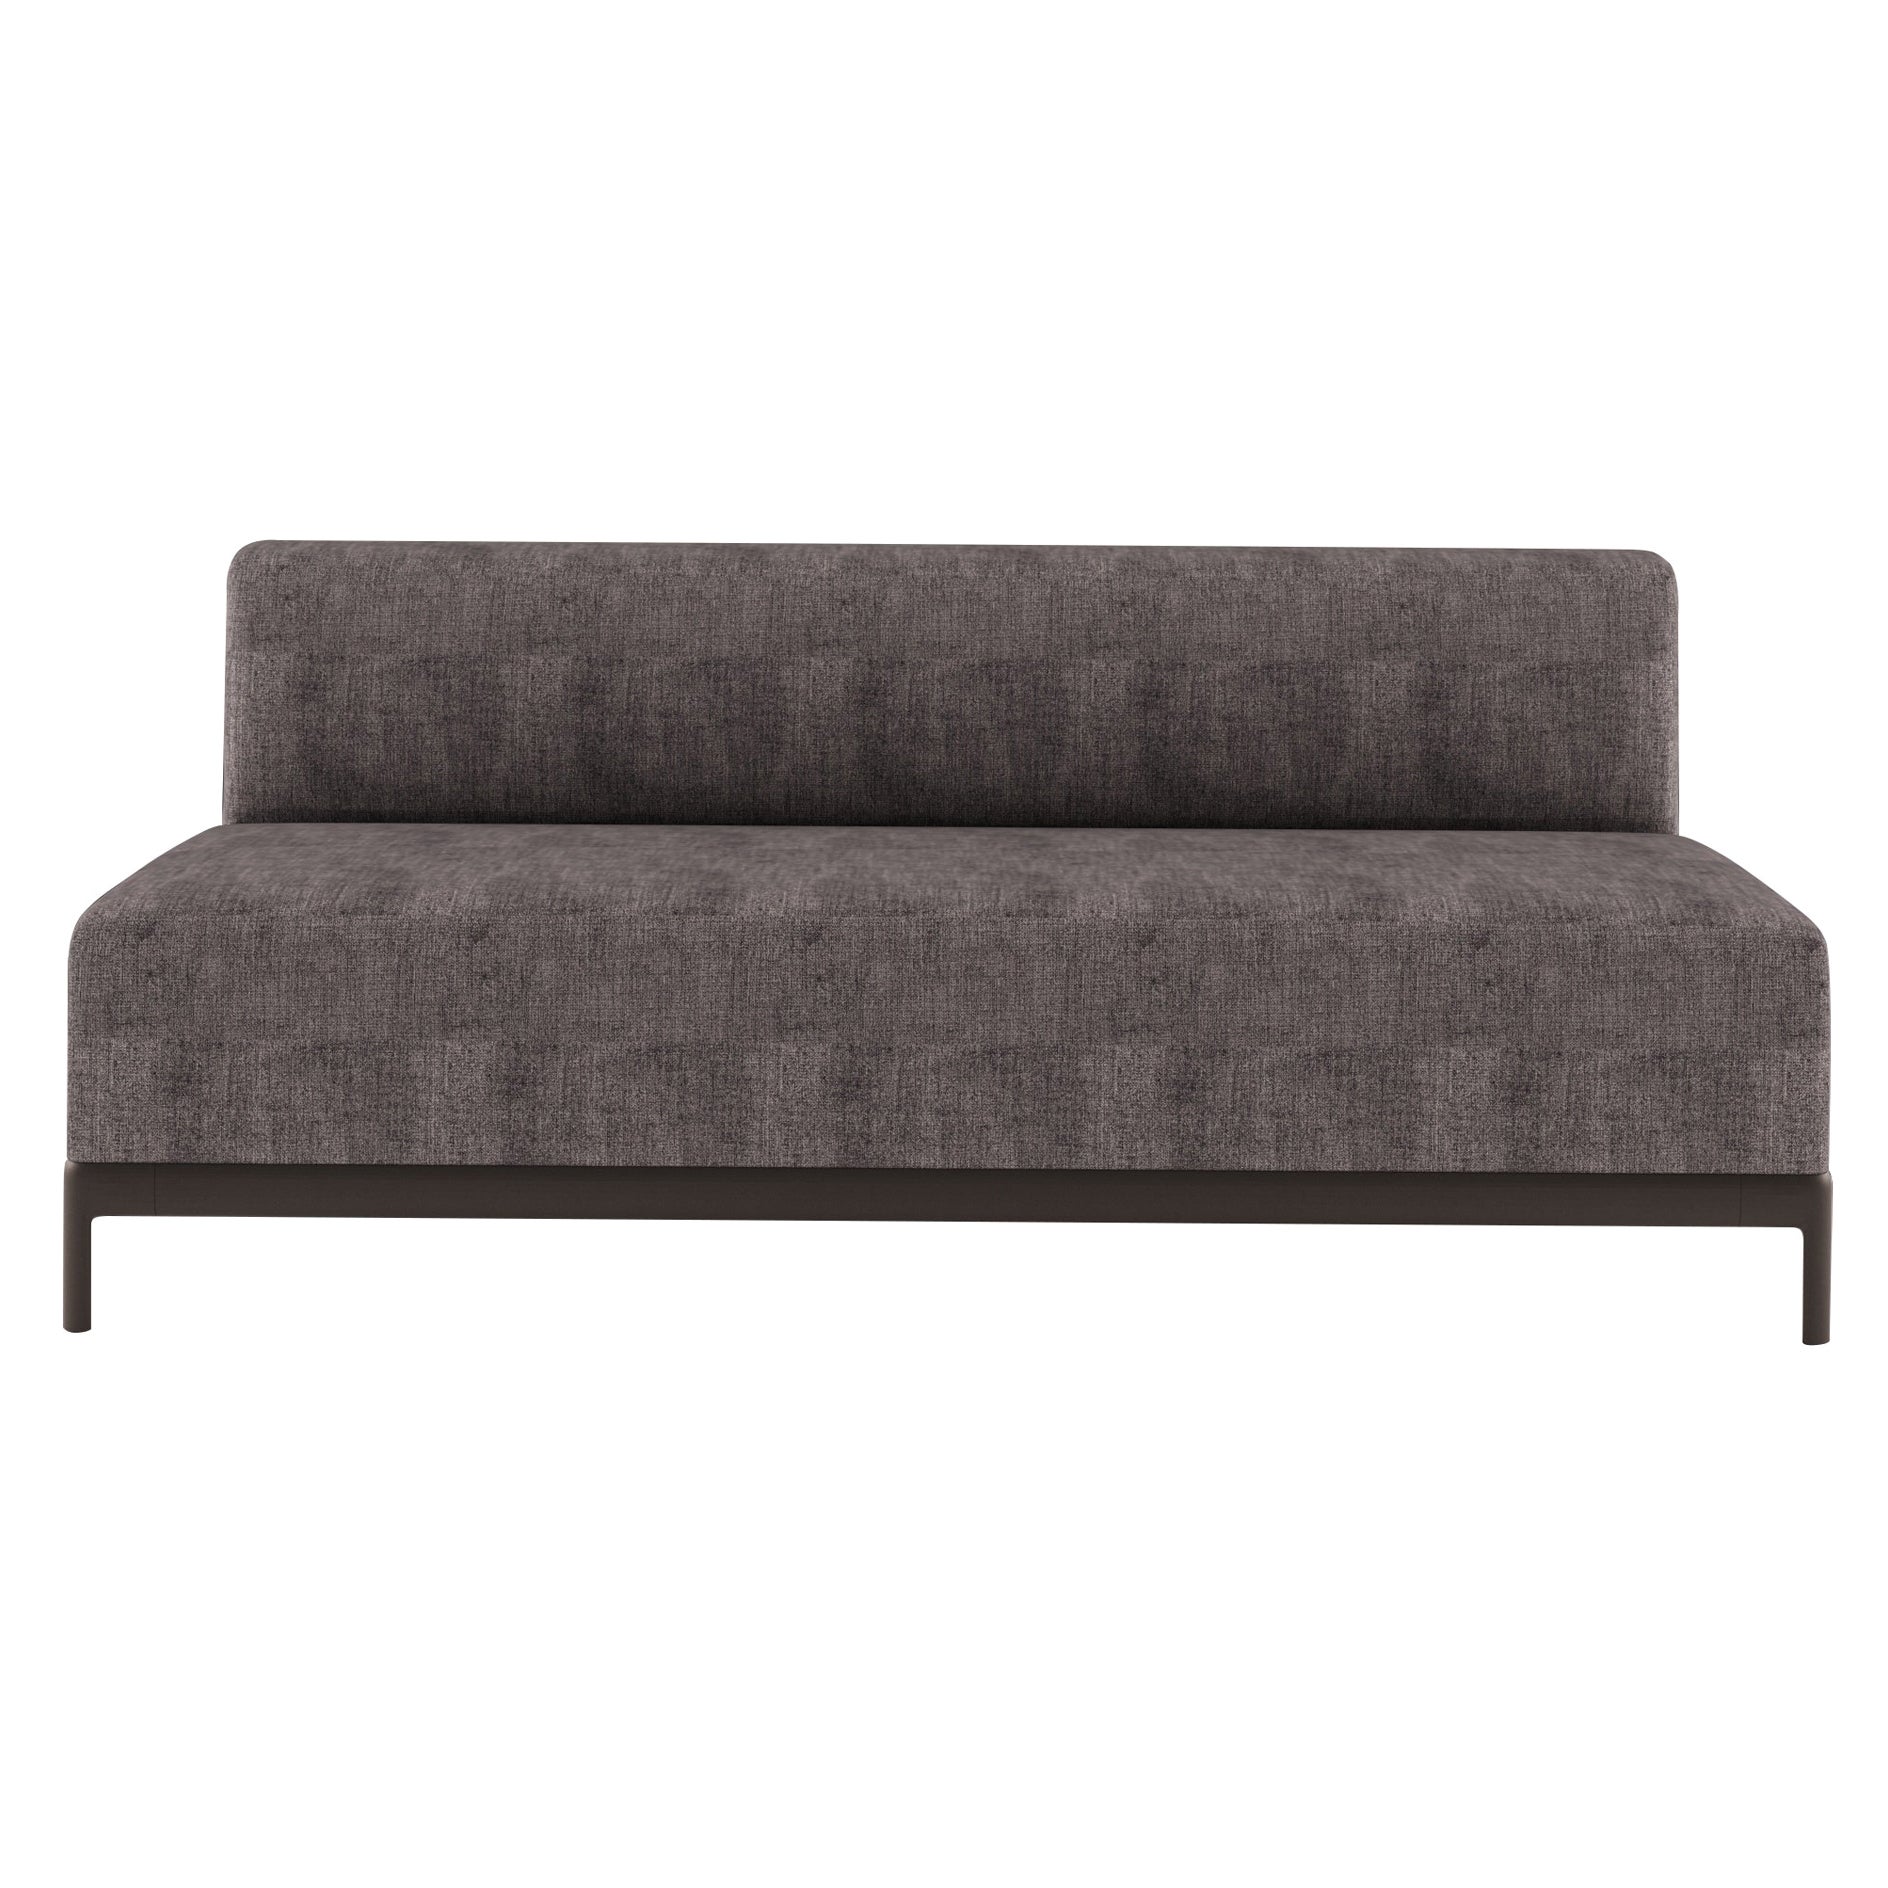 Alias P34 AluZen Soft Central Sofa with Upholstery & Lacquered Aluminum Frame